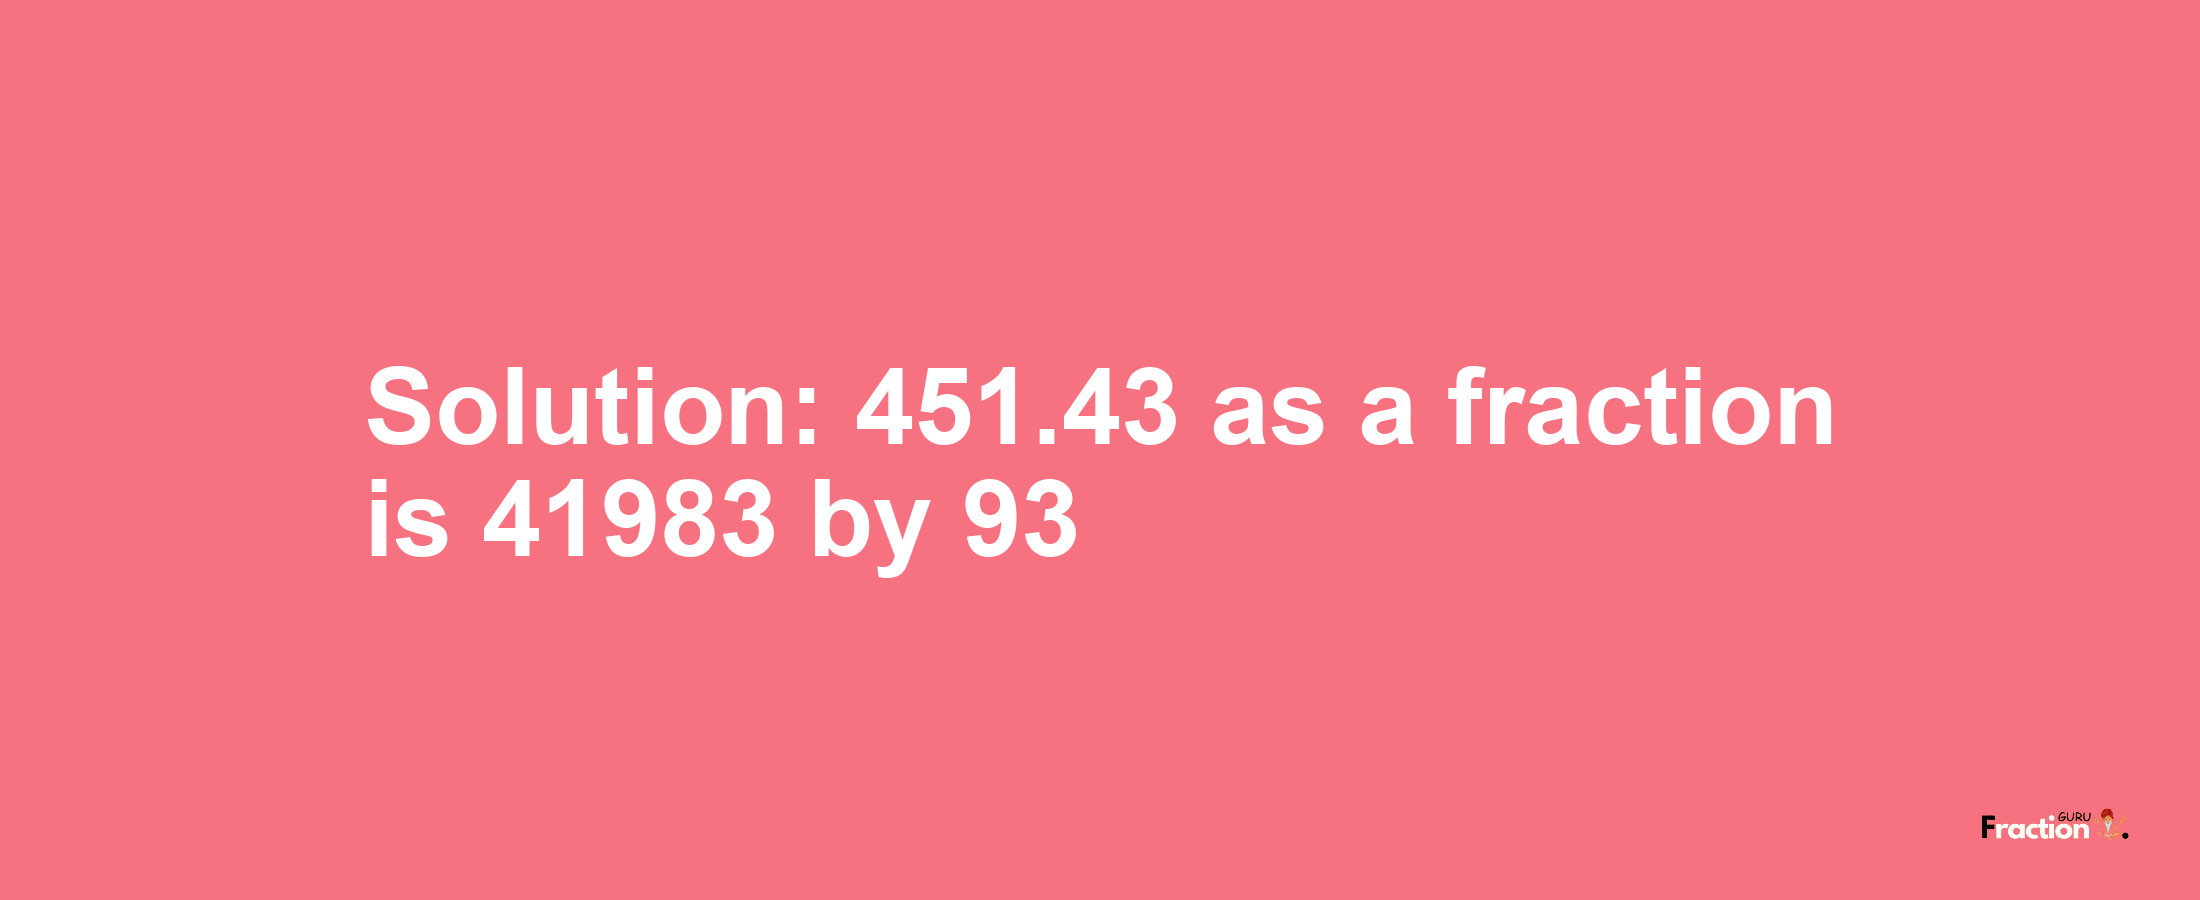 Solution:451.43 as a fraction is 41983/93